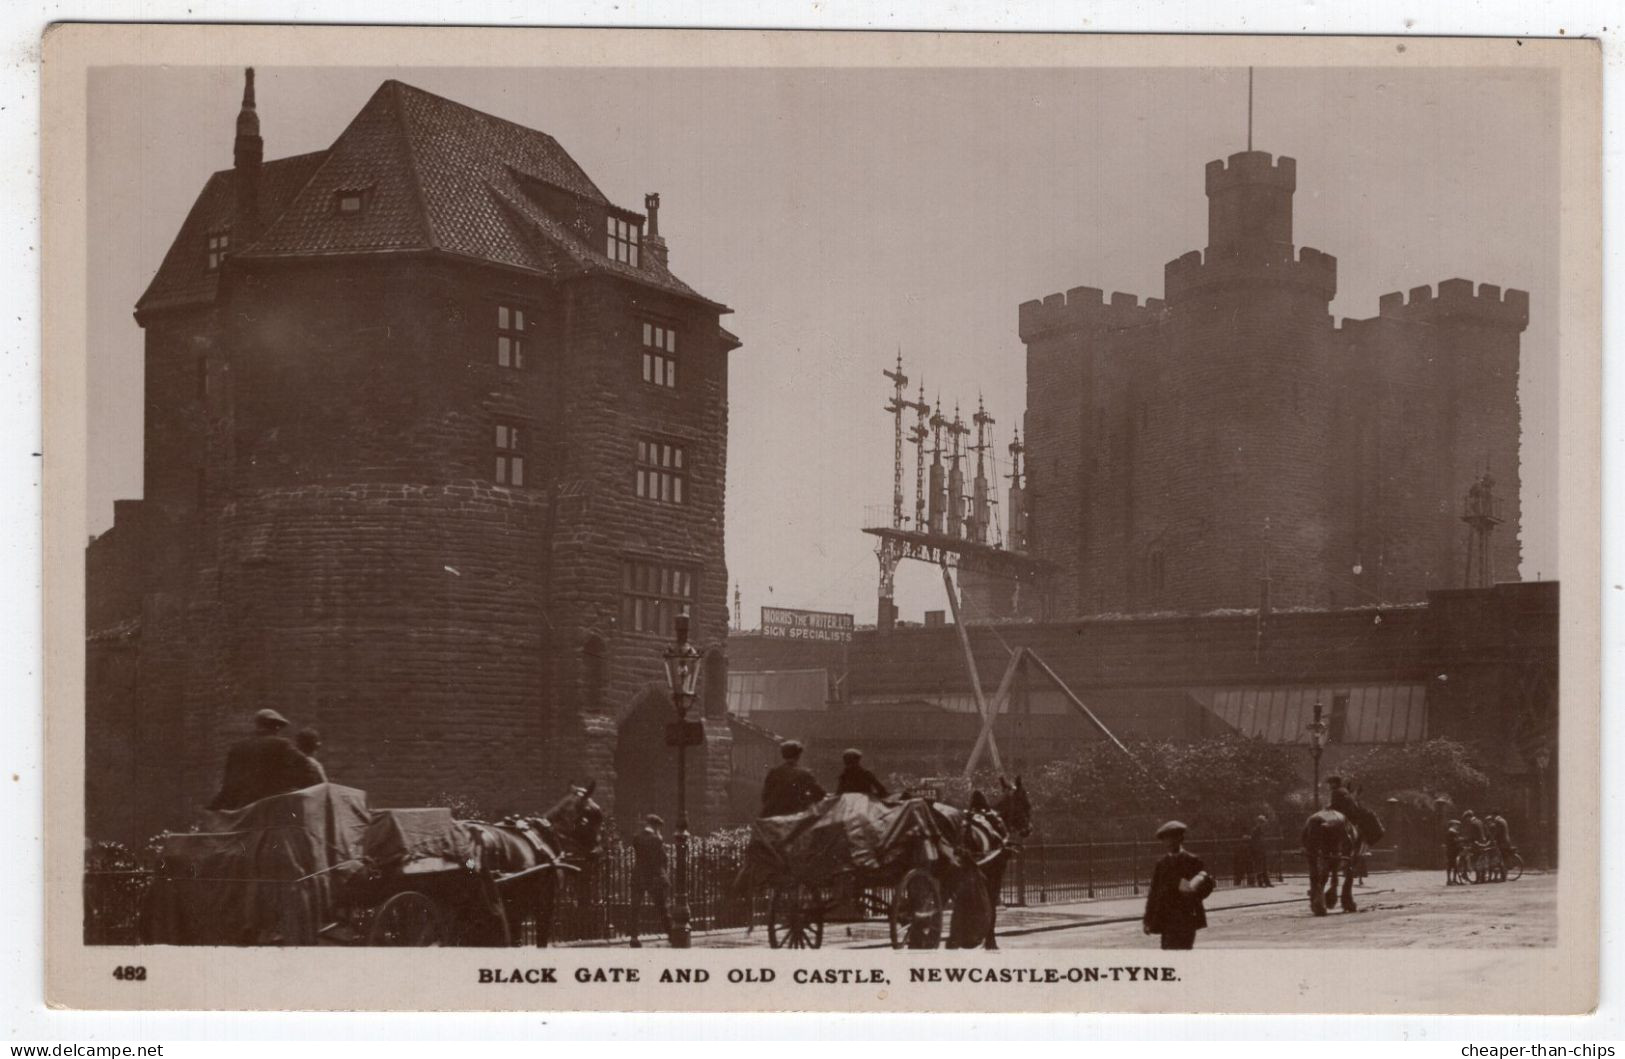 NEWCASTLE -on-TYNE - Black Gate And Old Castle - W.H. Smith - Newcastle-upon-Tyne